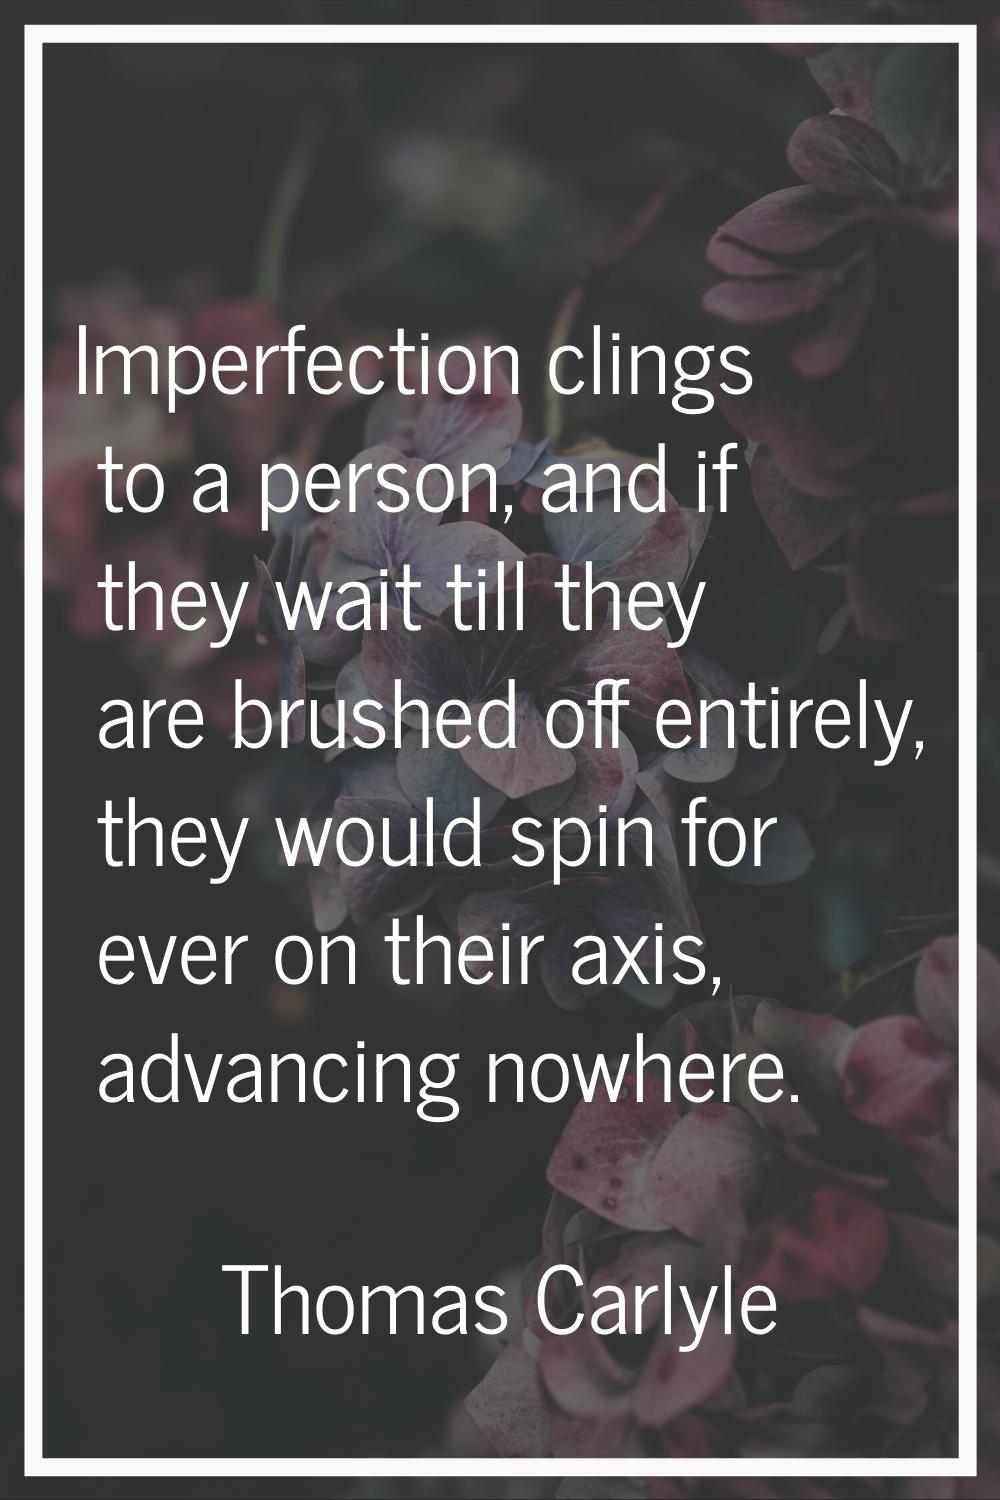 Imperfection clings to a person, and if they wait till they are brushed off entirely, they would sp